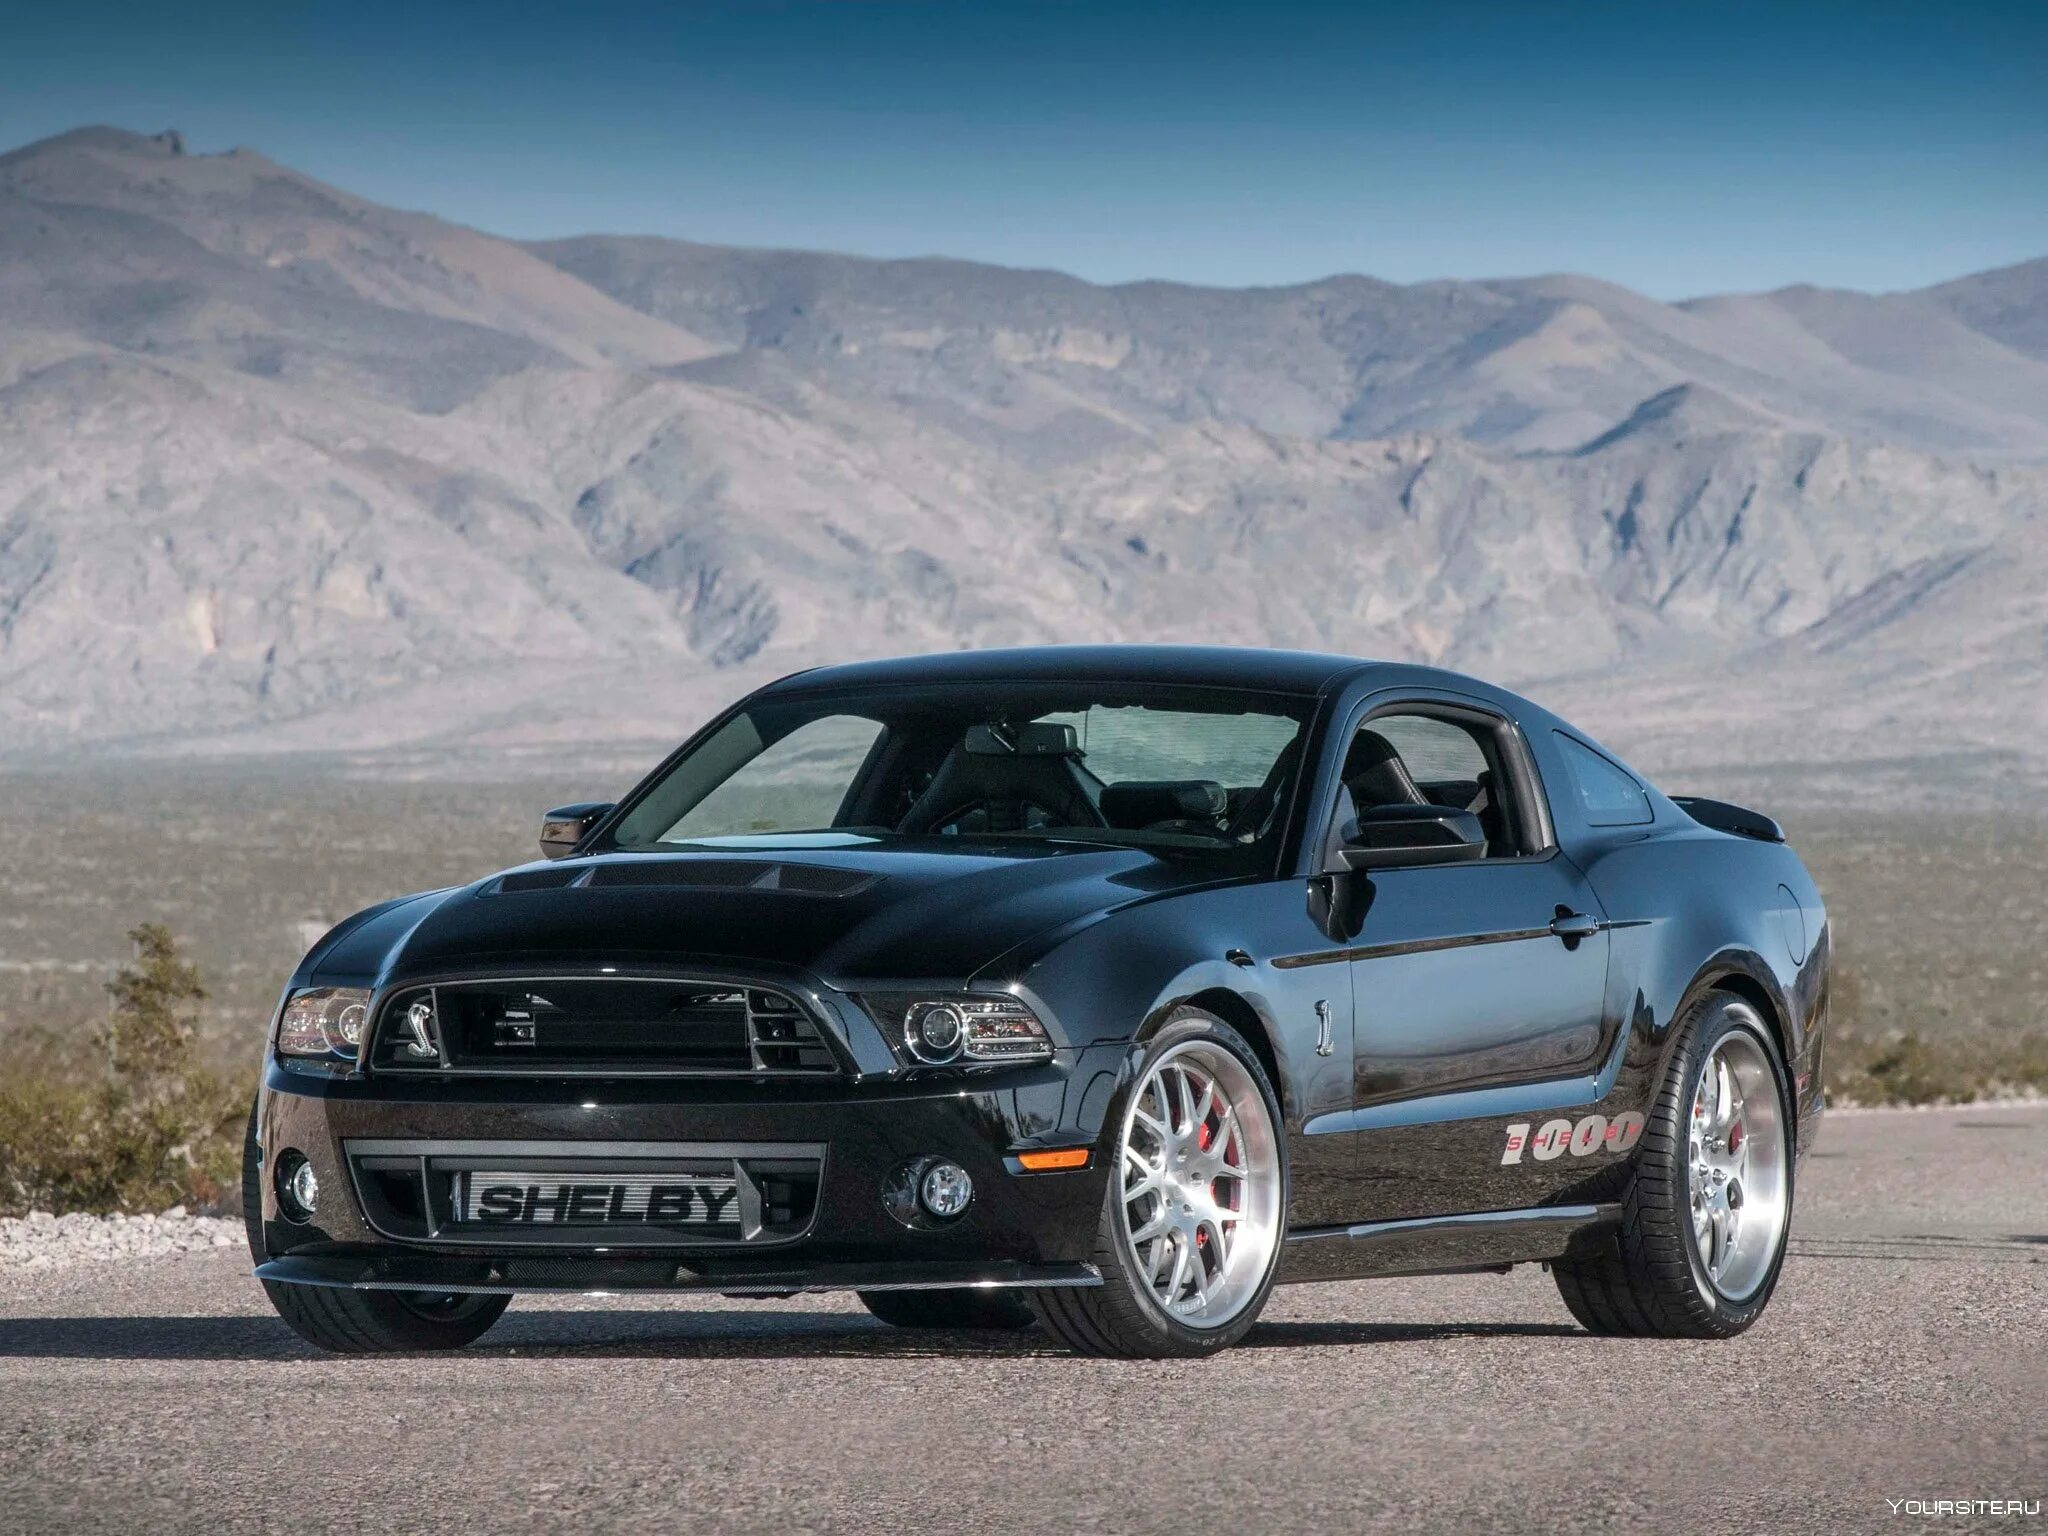 Форд Мустанг Шелби 1000. Форд Мустанг gt 1000. Ford Mustang Shelby 1000 s/c. Ford Mustang Shelby gt 1000. Мустанг на русском языке